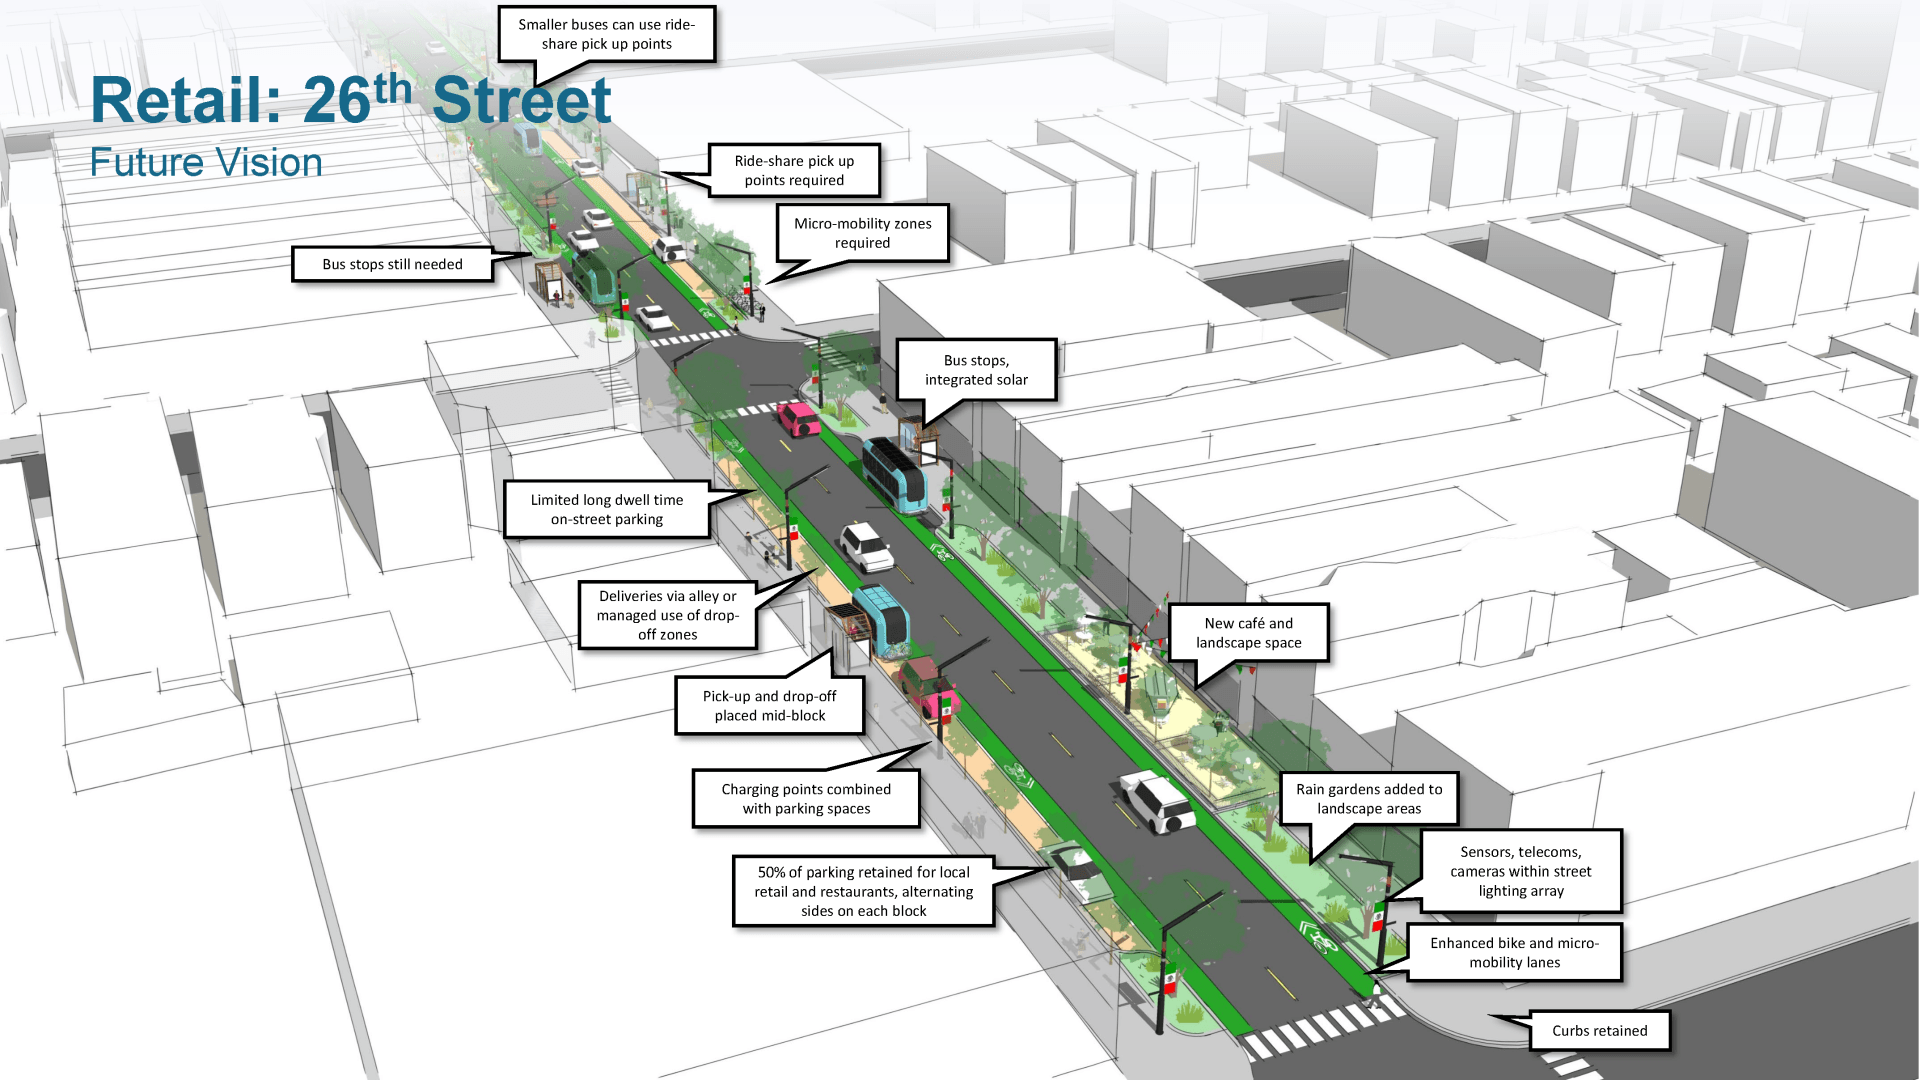 Illustration of 26th Street's future vision in 2030